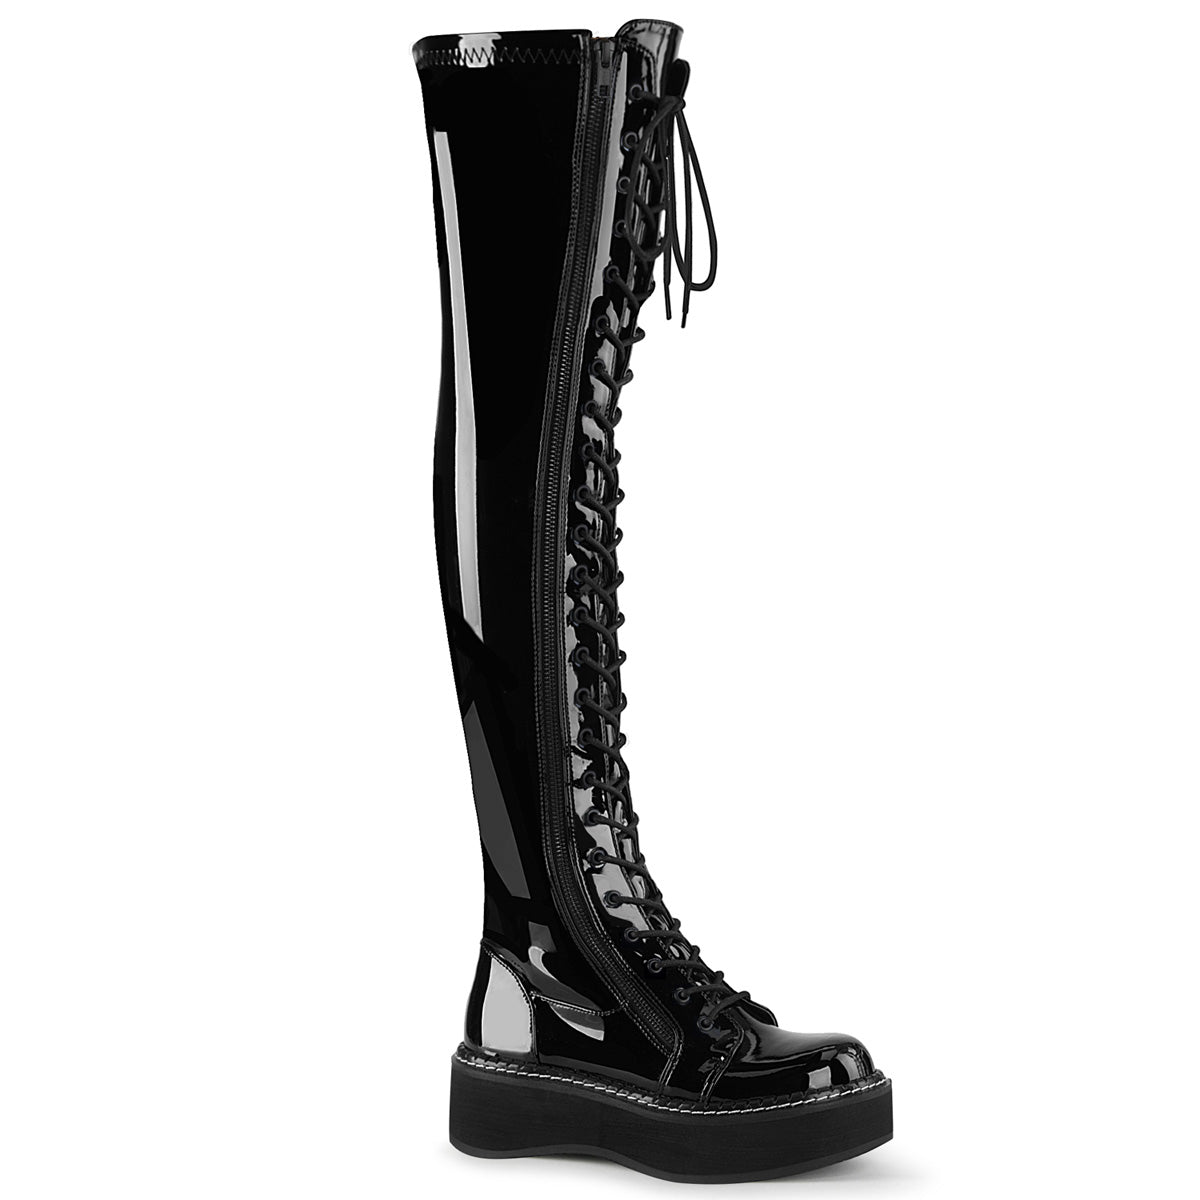 Too Fast | Demonia Emily 375 | Black Patent Leather Women's Over The Knee Boots